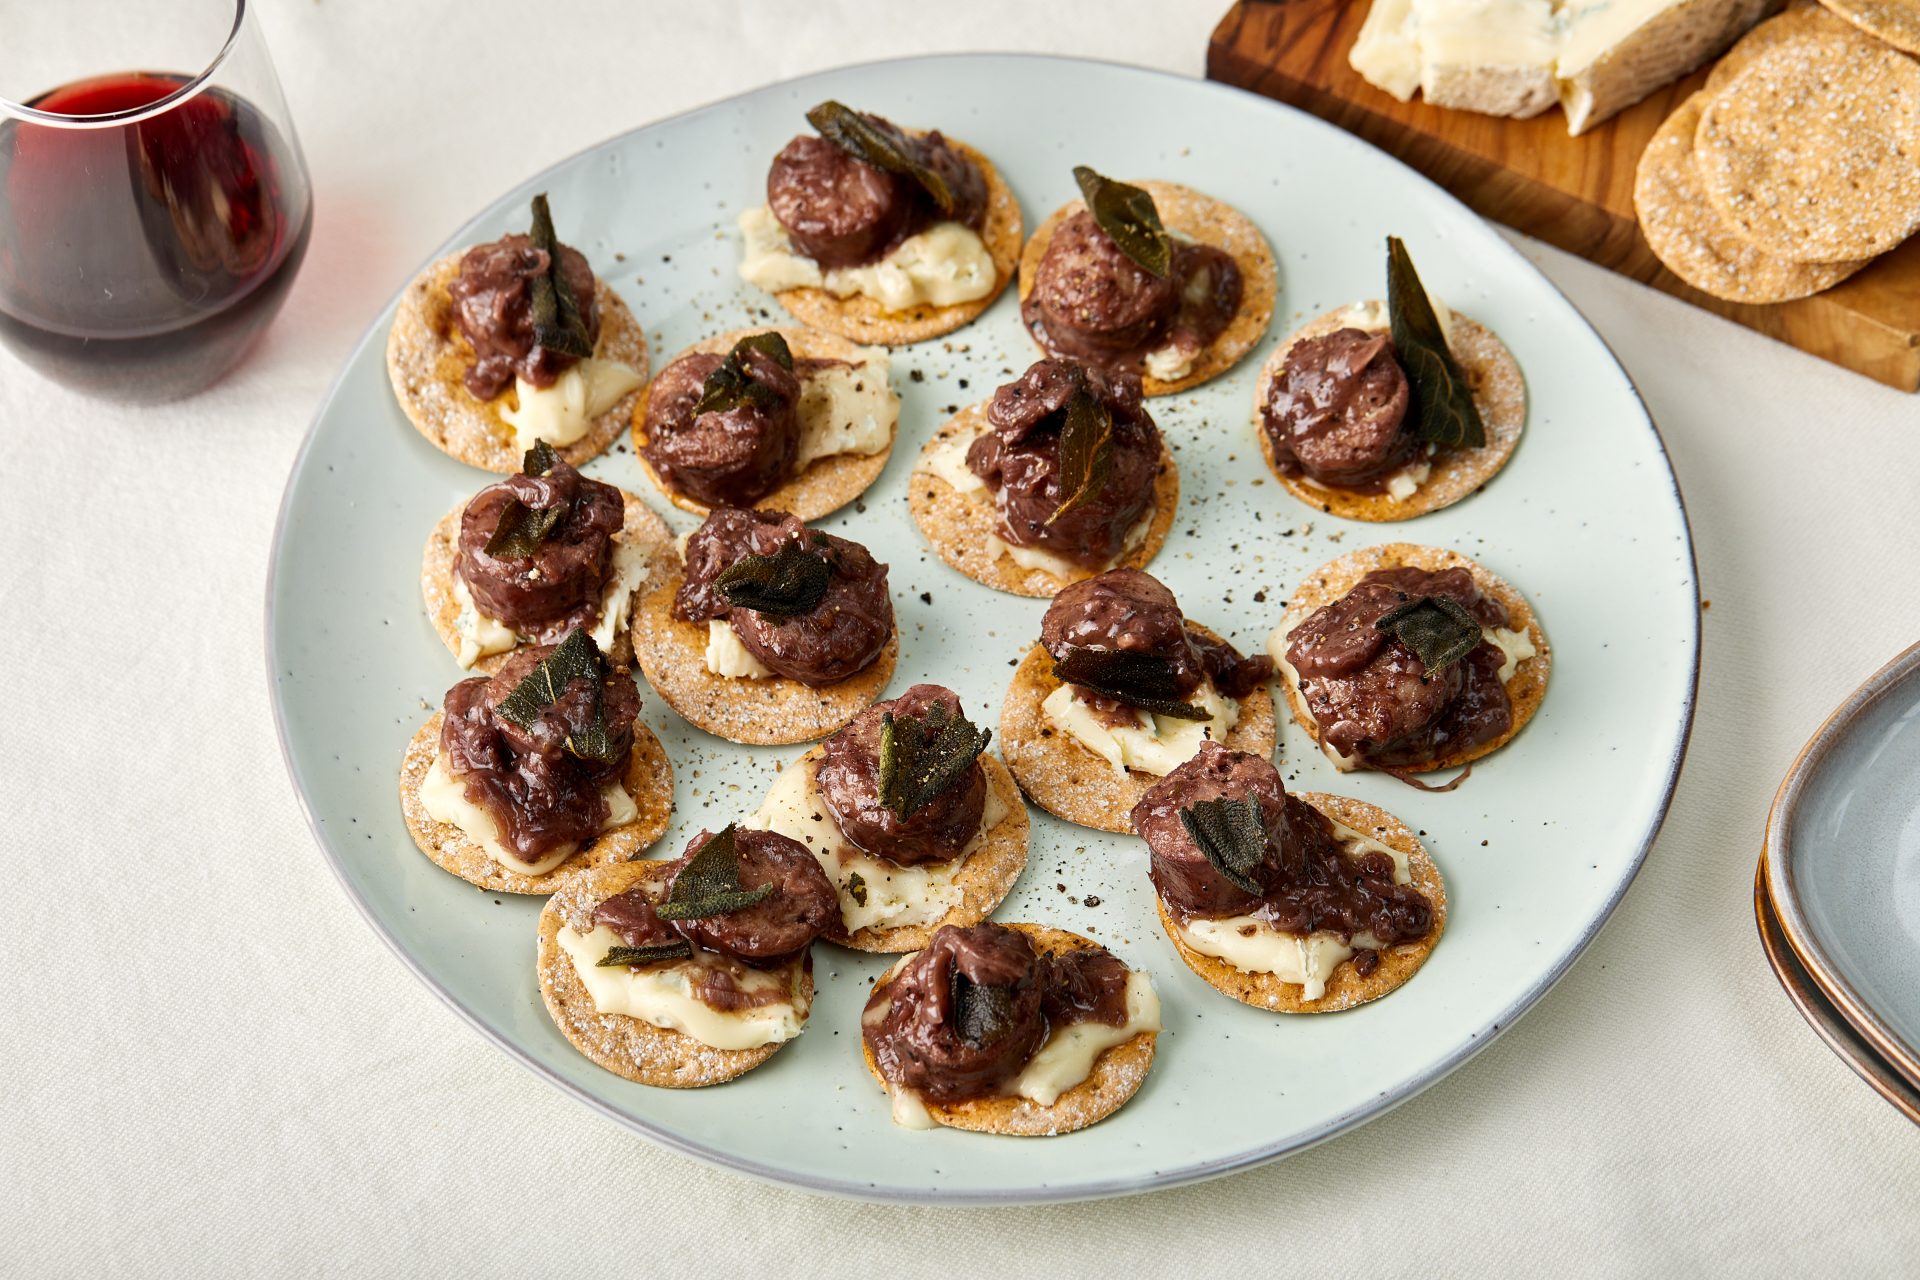 Sausage Canape with Peter's Yard Original Sourdough Crackers by Claire Thomson